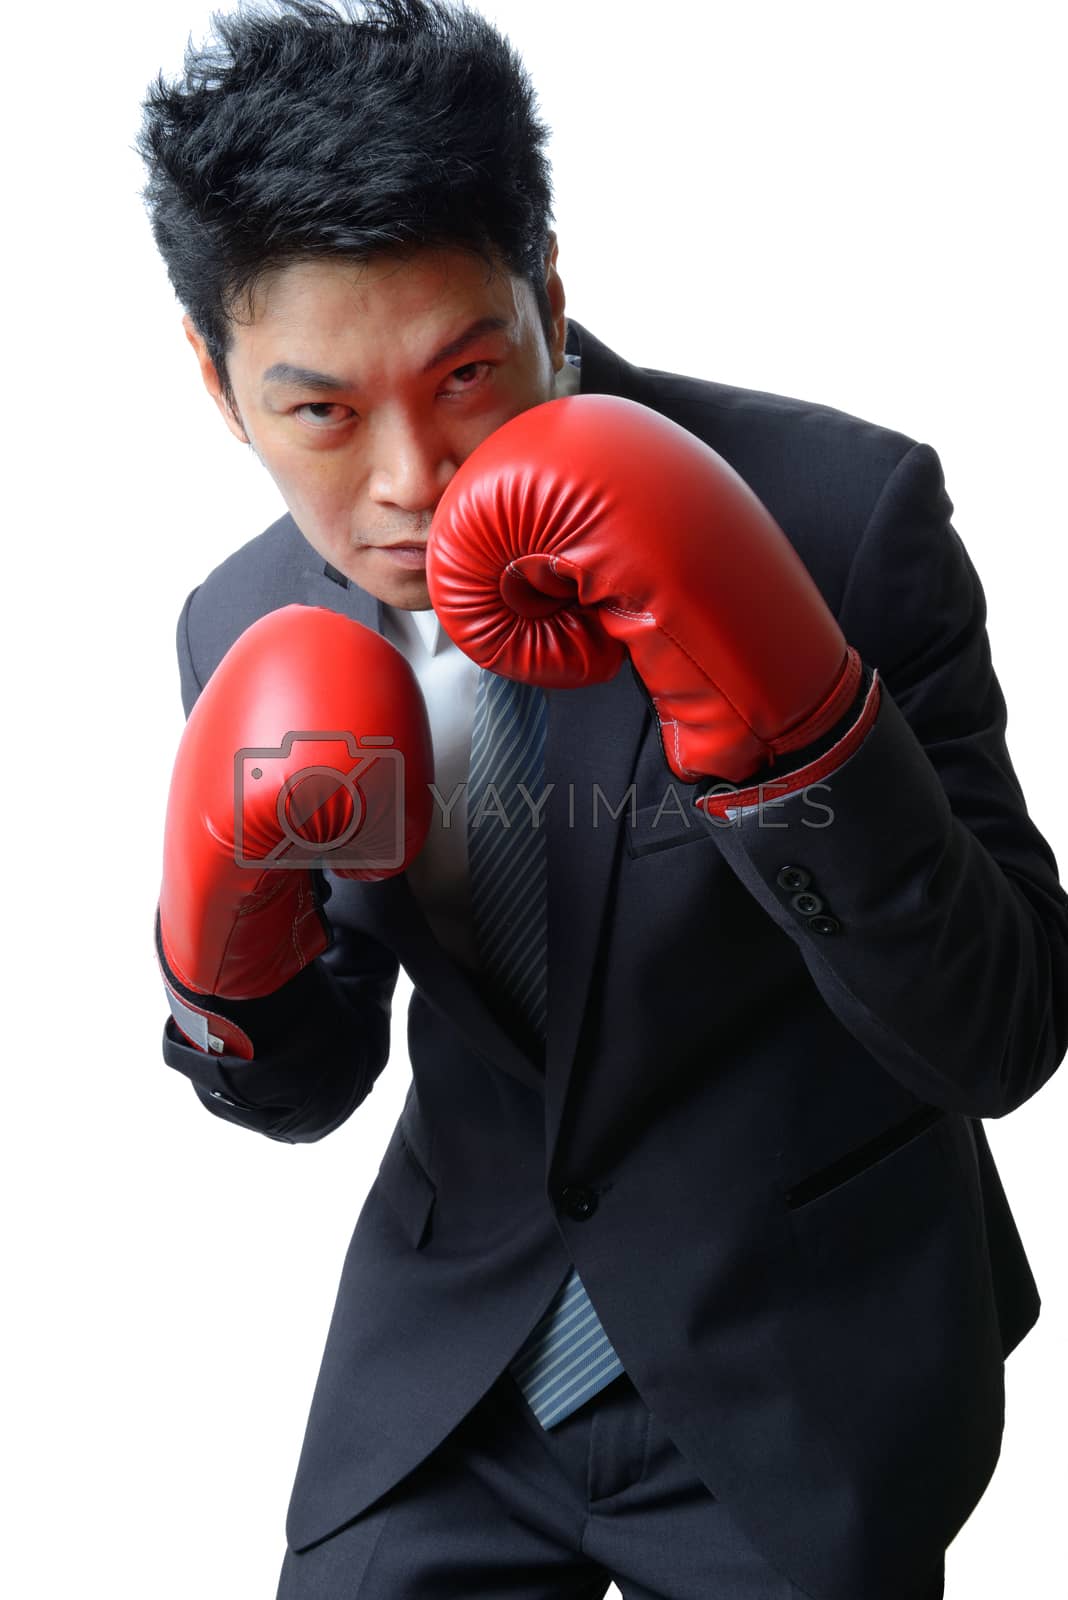 Royalty free image of businessman with boxing glove ready to fight with work, business by numskyman